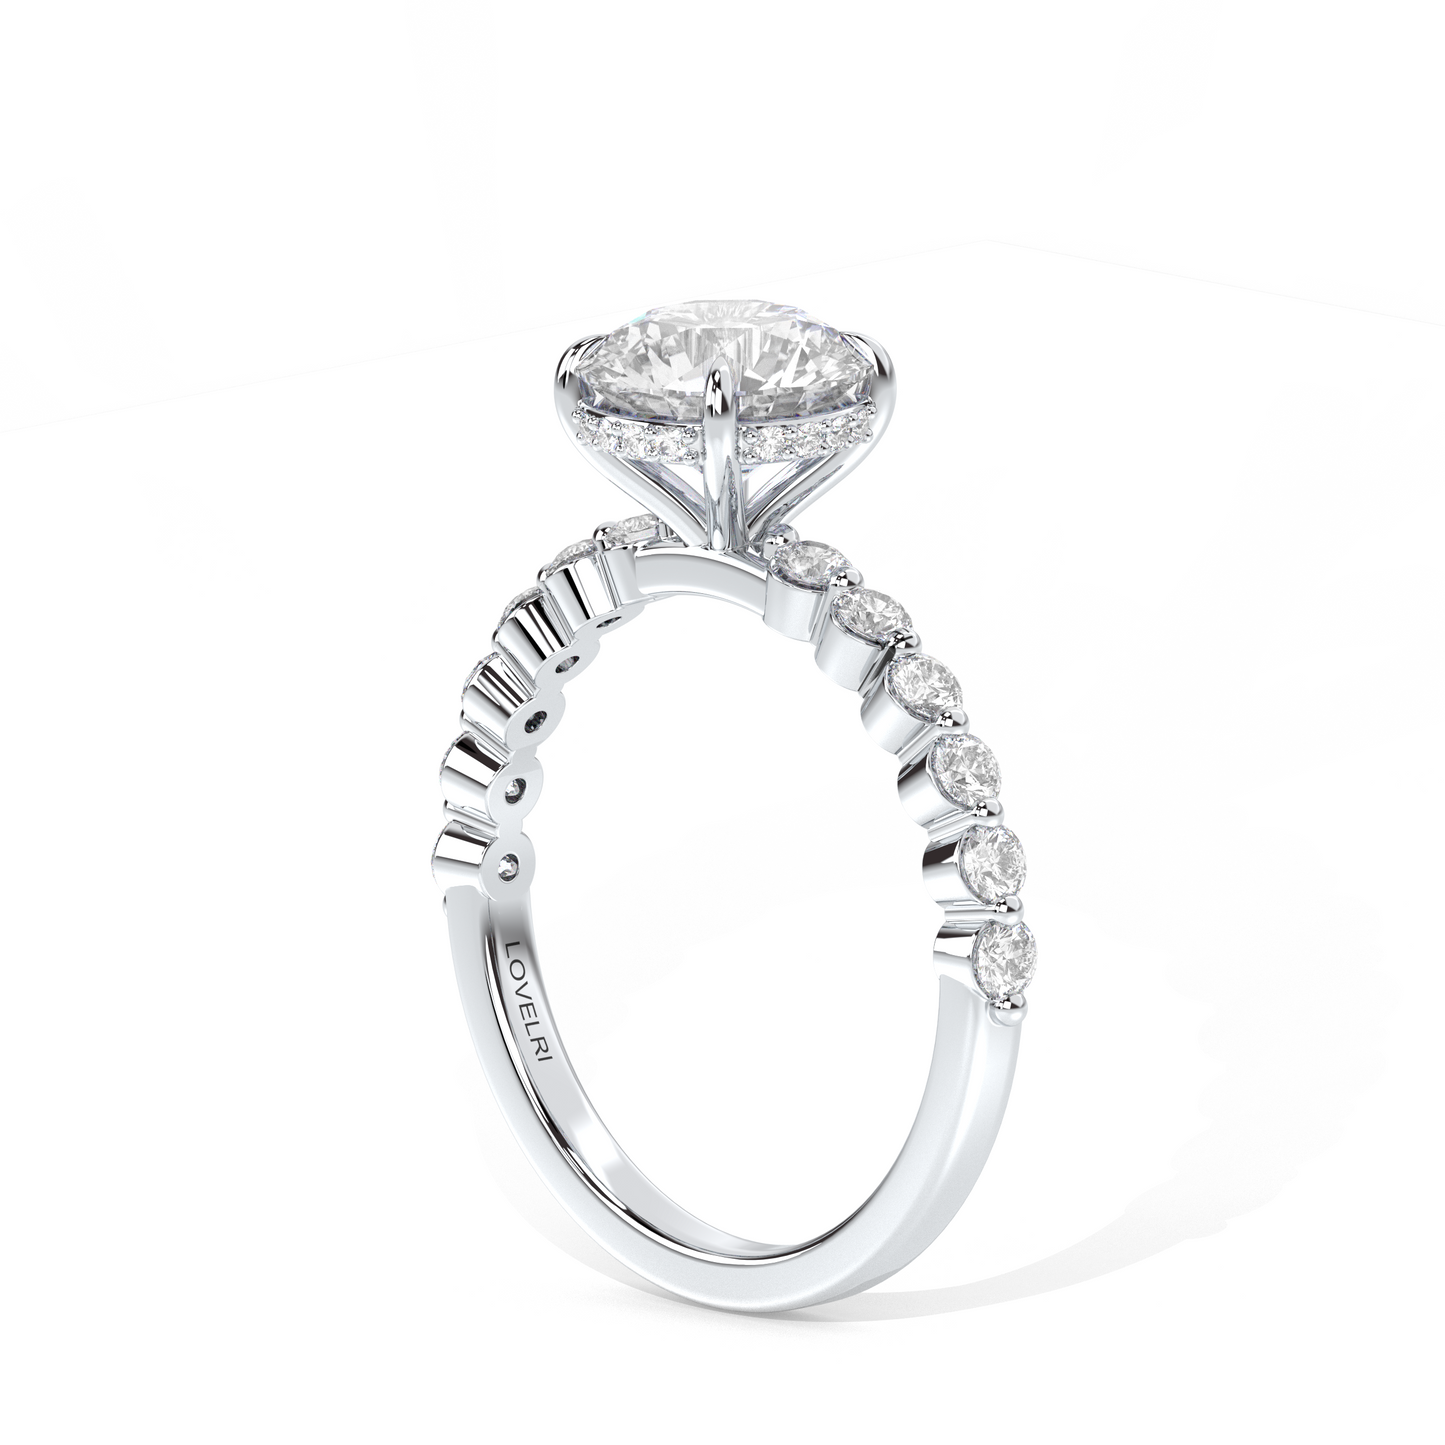 Face Up View - Scalloped Band Round Engagement Ring White Gold